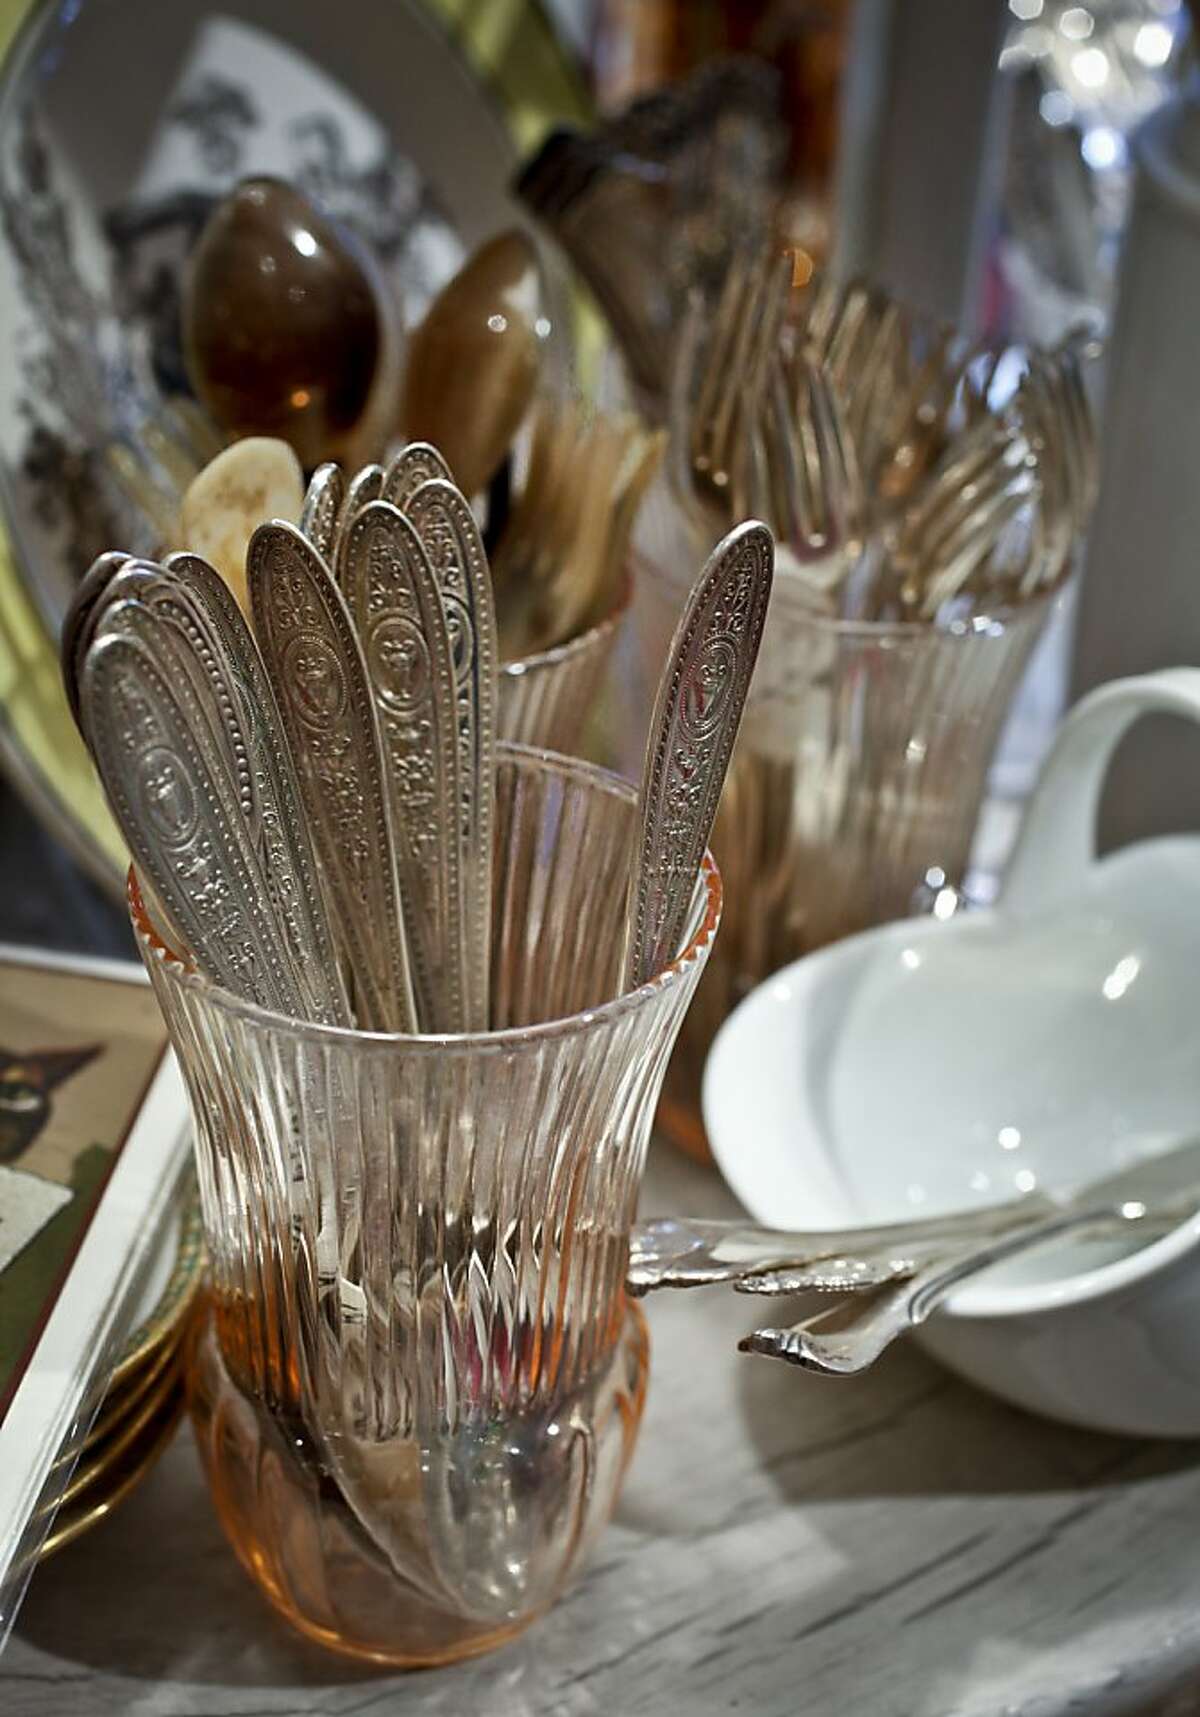 Period George Antiques on Clement St. in San Francisco, Calif., carries a wide variety of tableware, glassware, and flatware